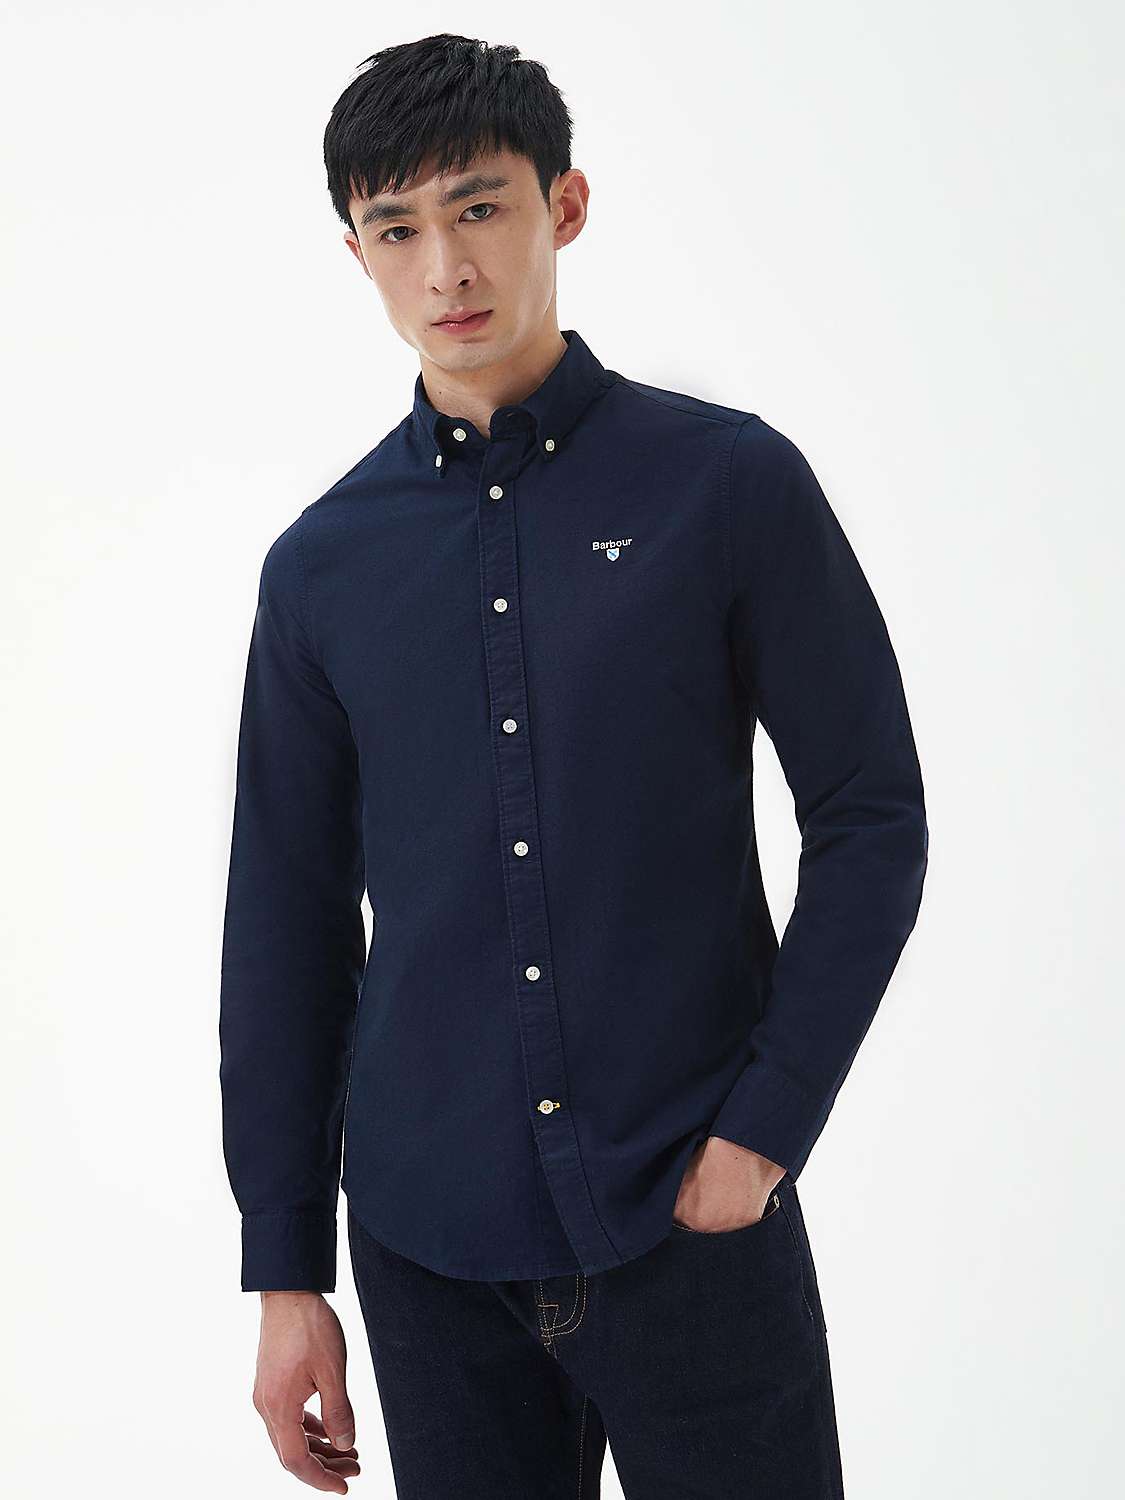 Barbour Tailored Fit Oxford Shirt, Navy at John Lewis & Partners